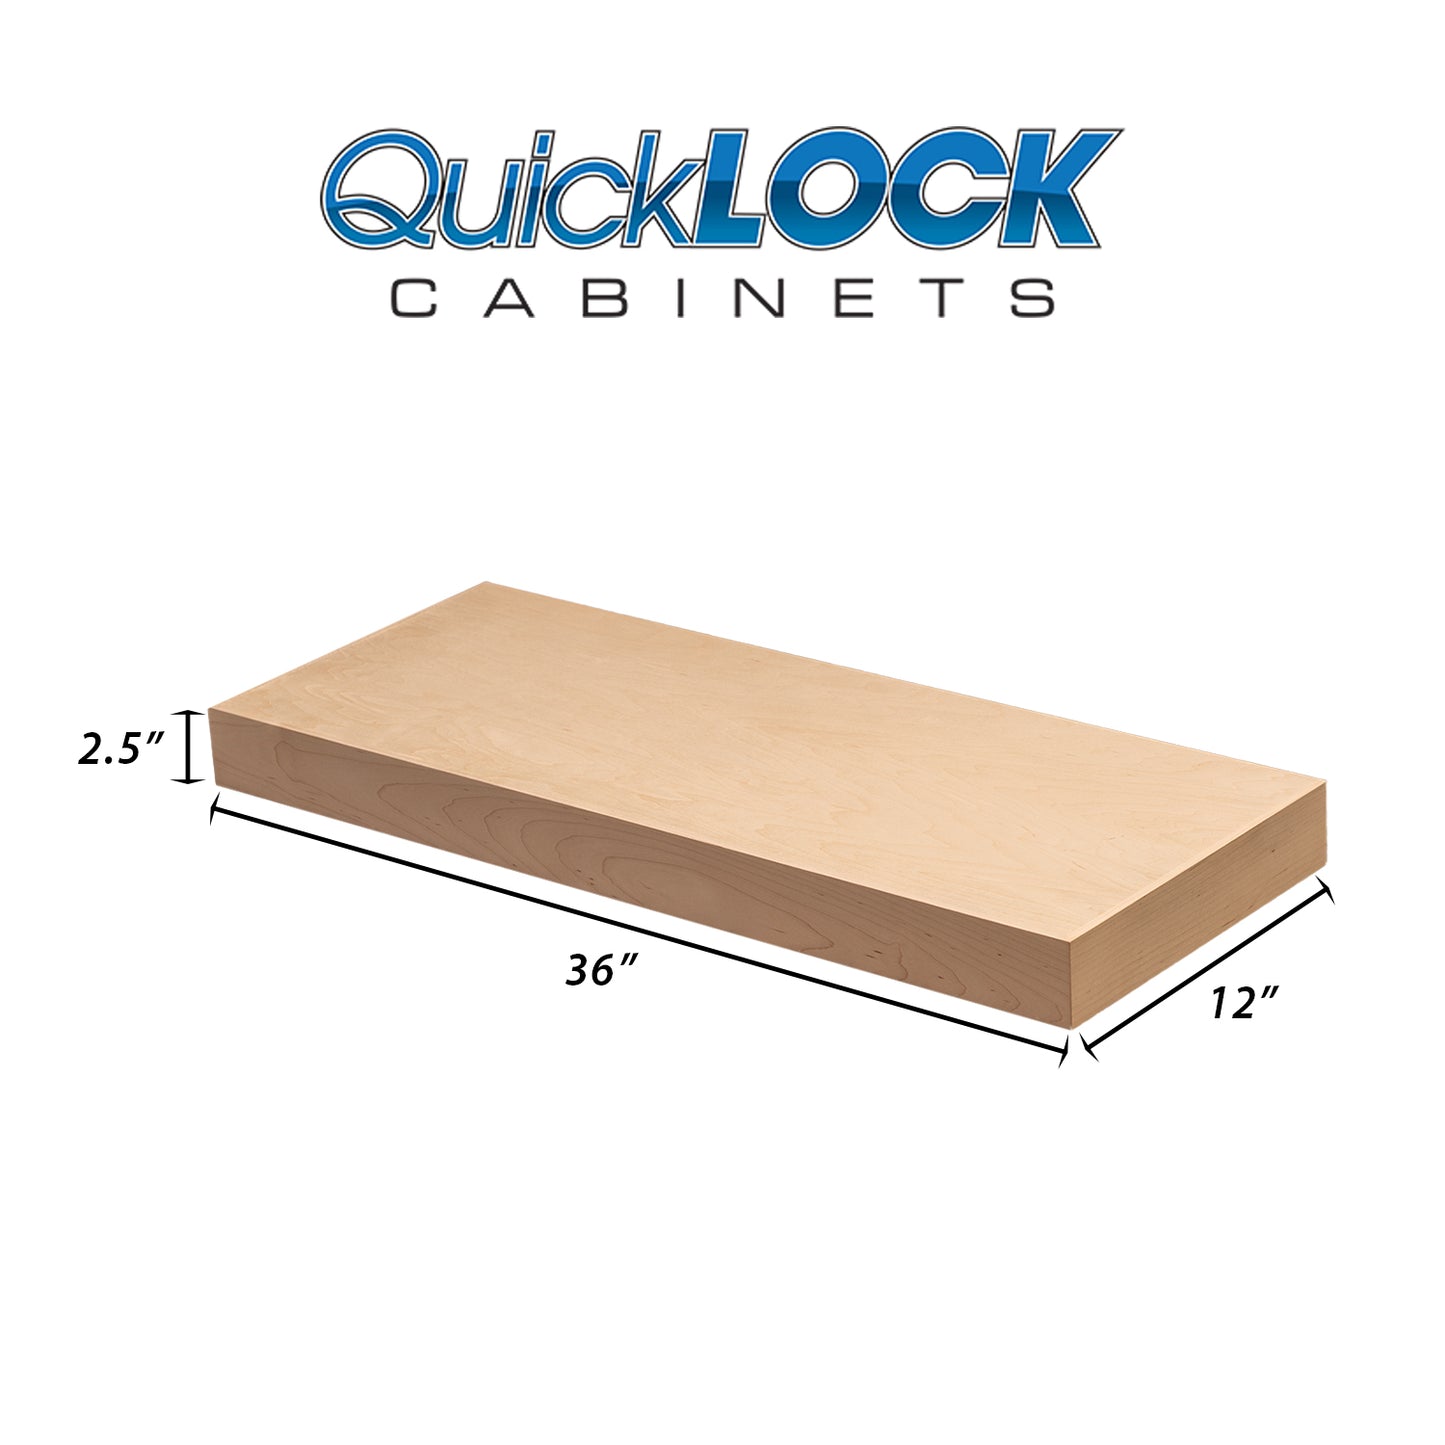 Quicklock Cabinets Floating Shelves | 2.5" Thick | Raw Maple, 12" D x 36" W x 2.5" H | American Made | Hardwood Bracket | Complete Shelf Unit